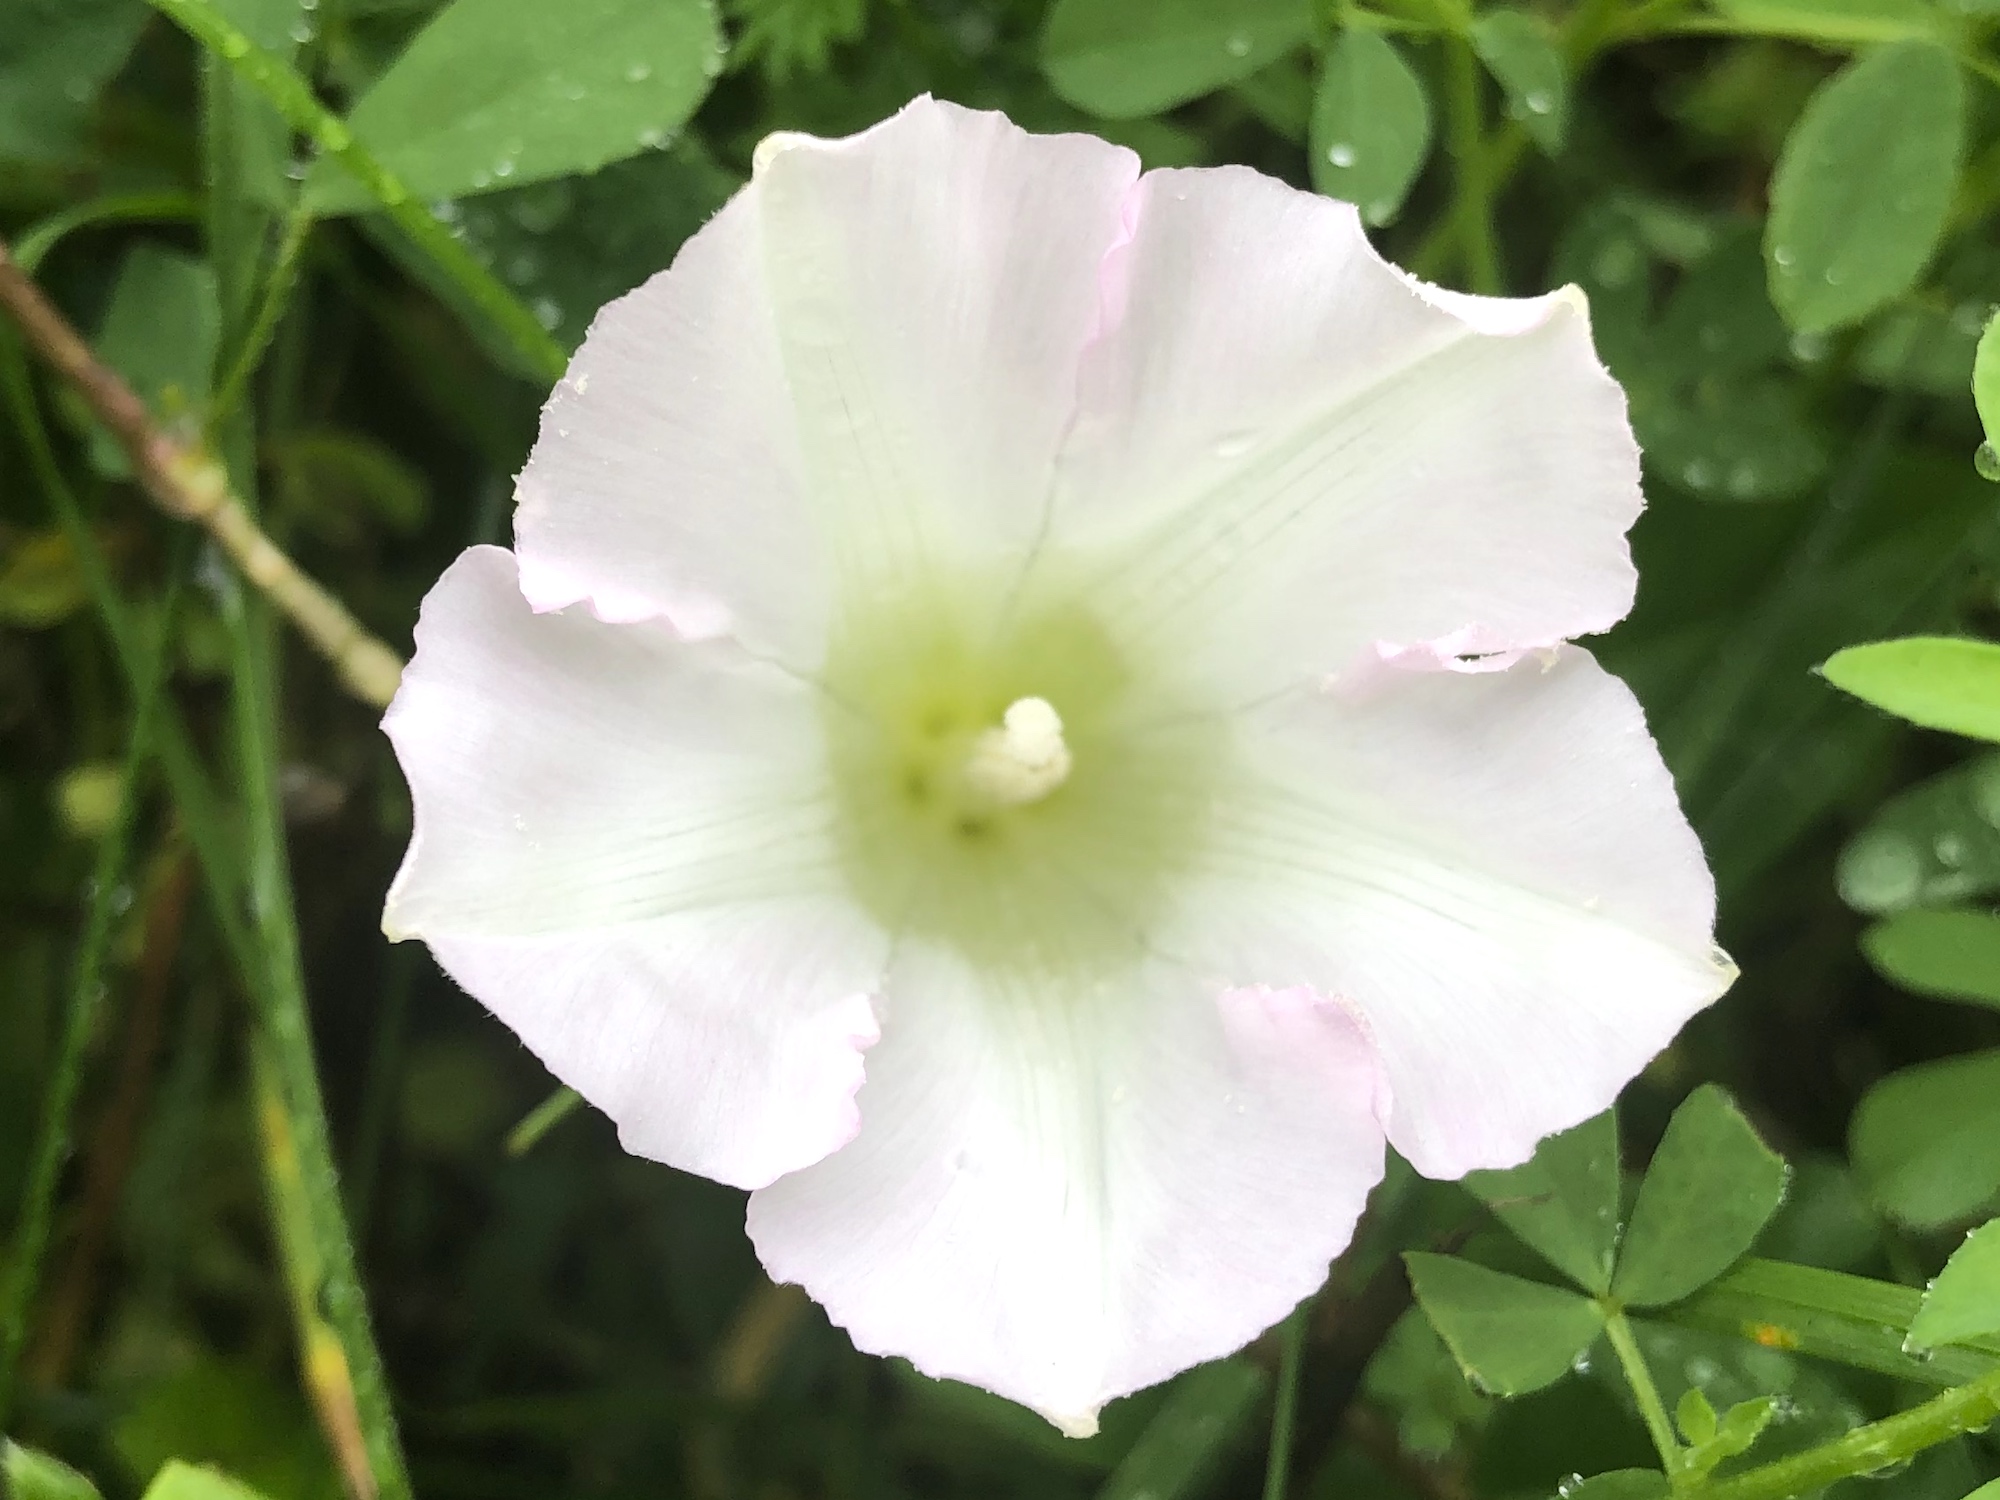 Hedge Bindweed on shore of Marion Dunn Pond in Madison, Wisconsin on September 28, 2019